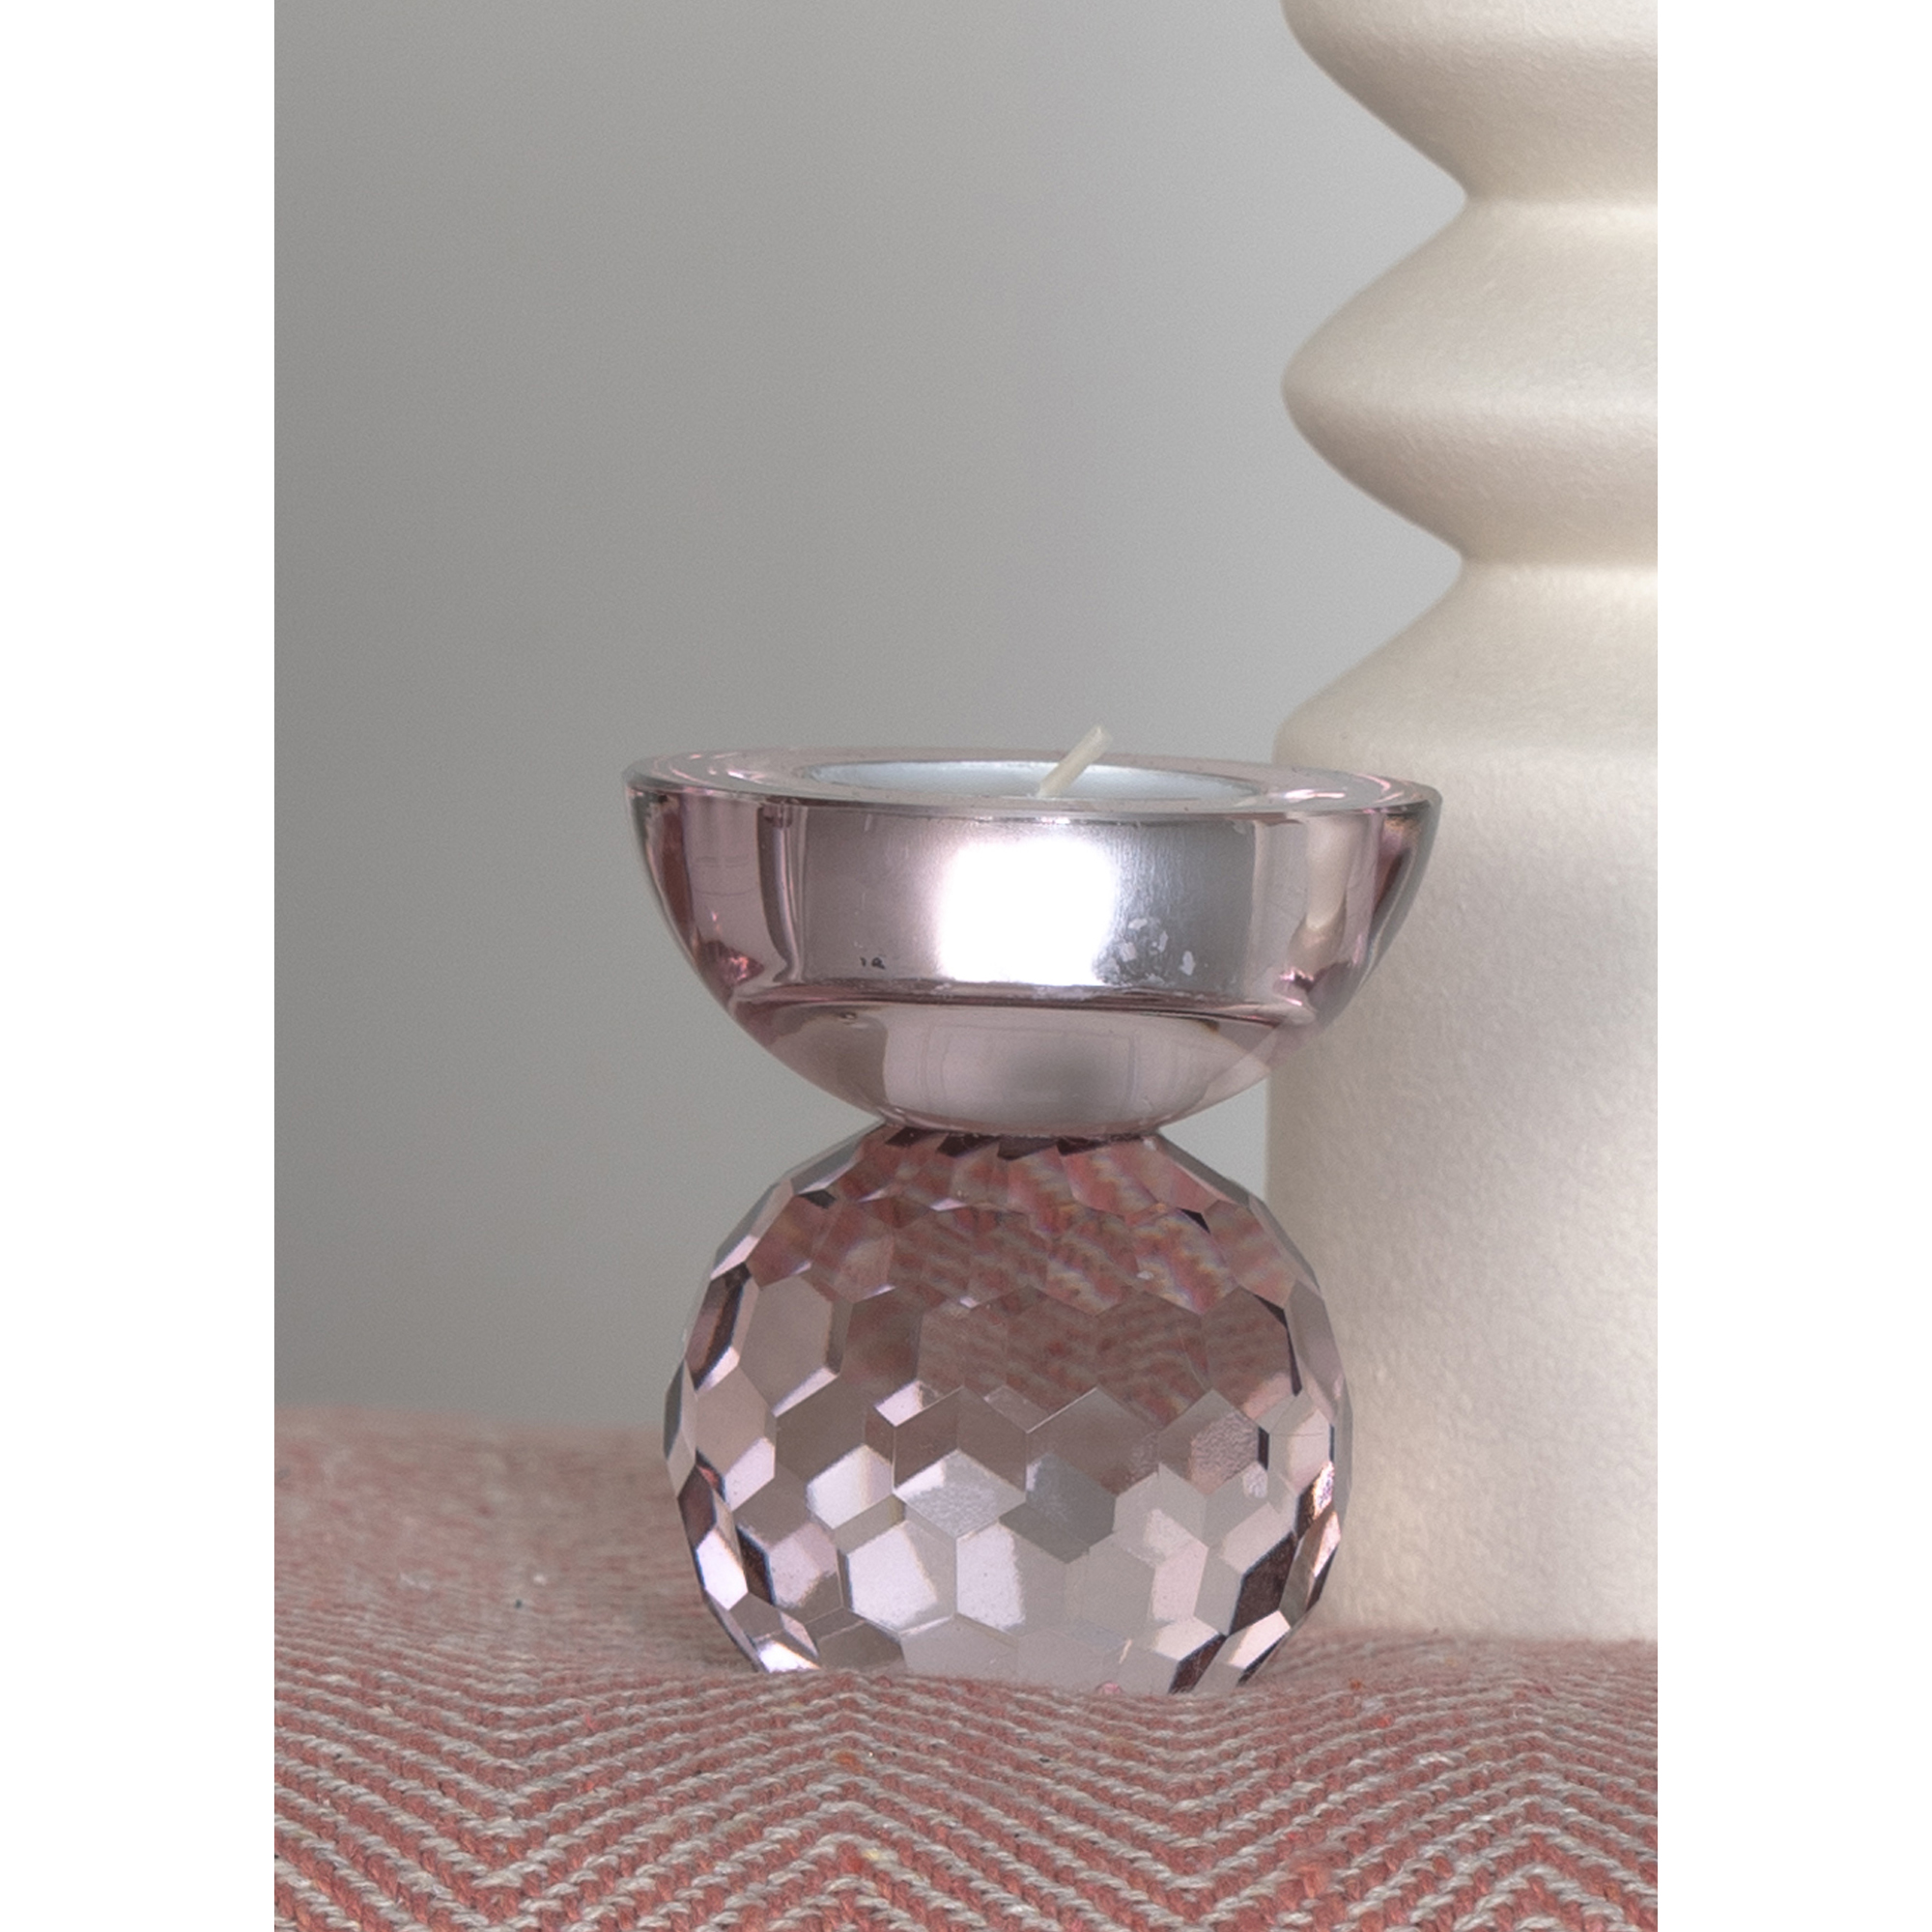 Burano Candle Holder - Candle holder in rose glass